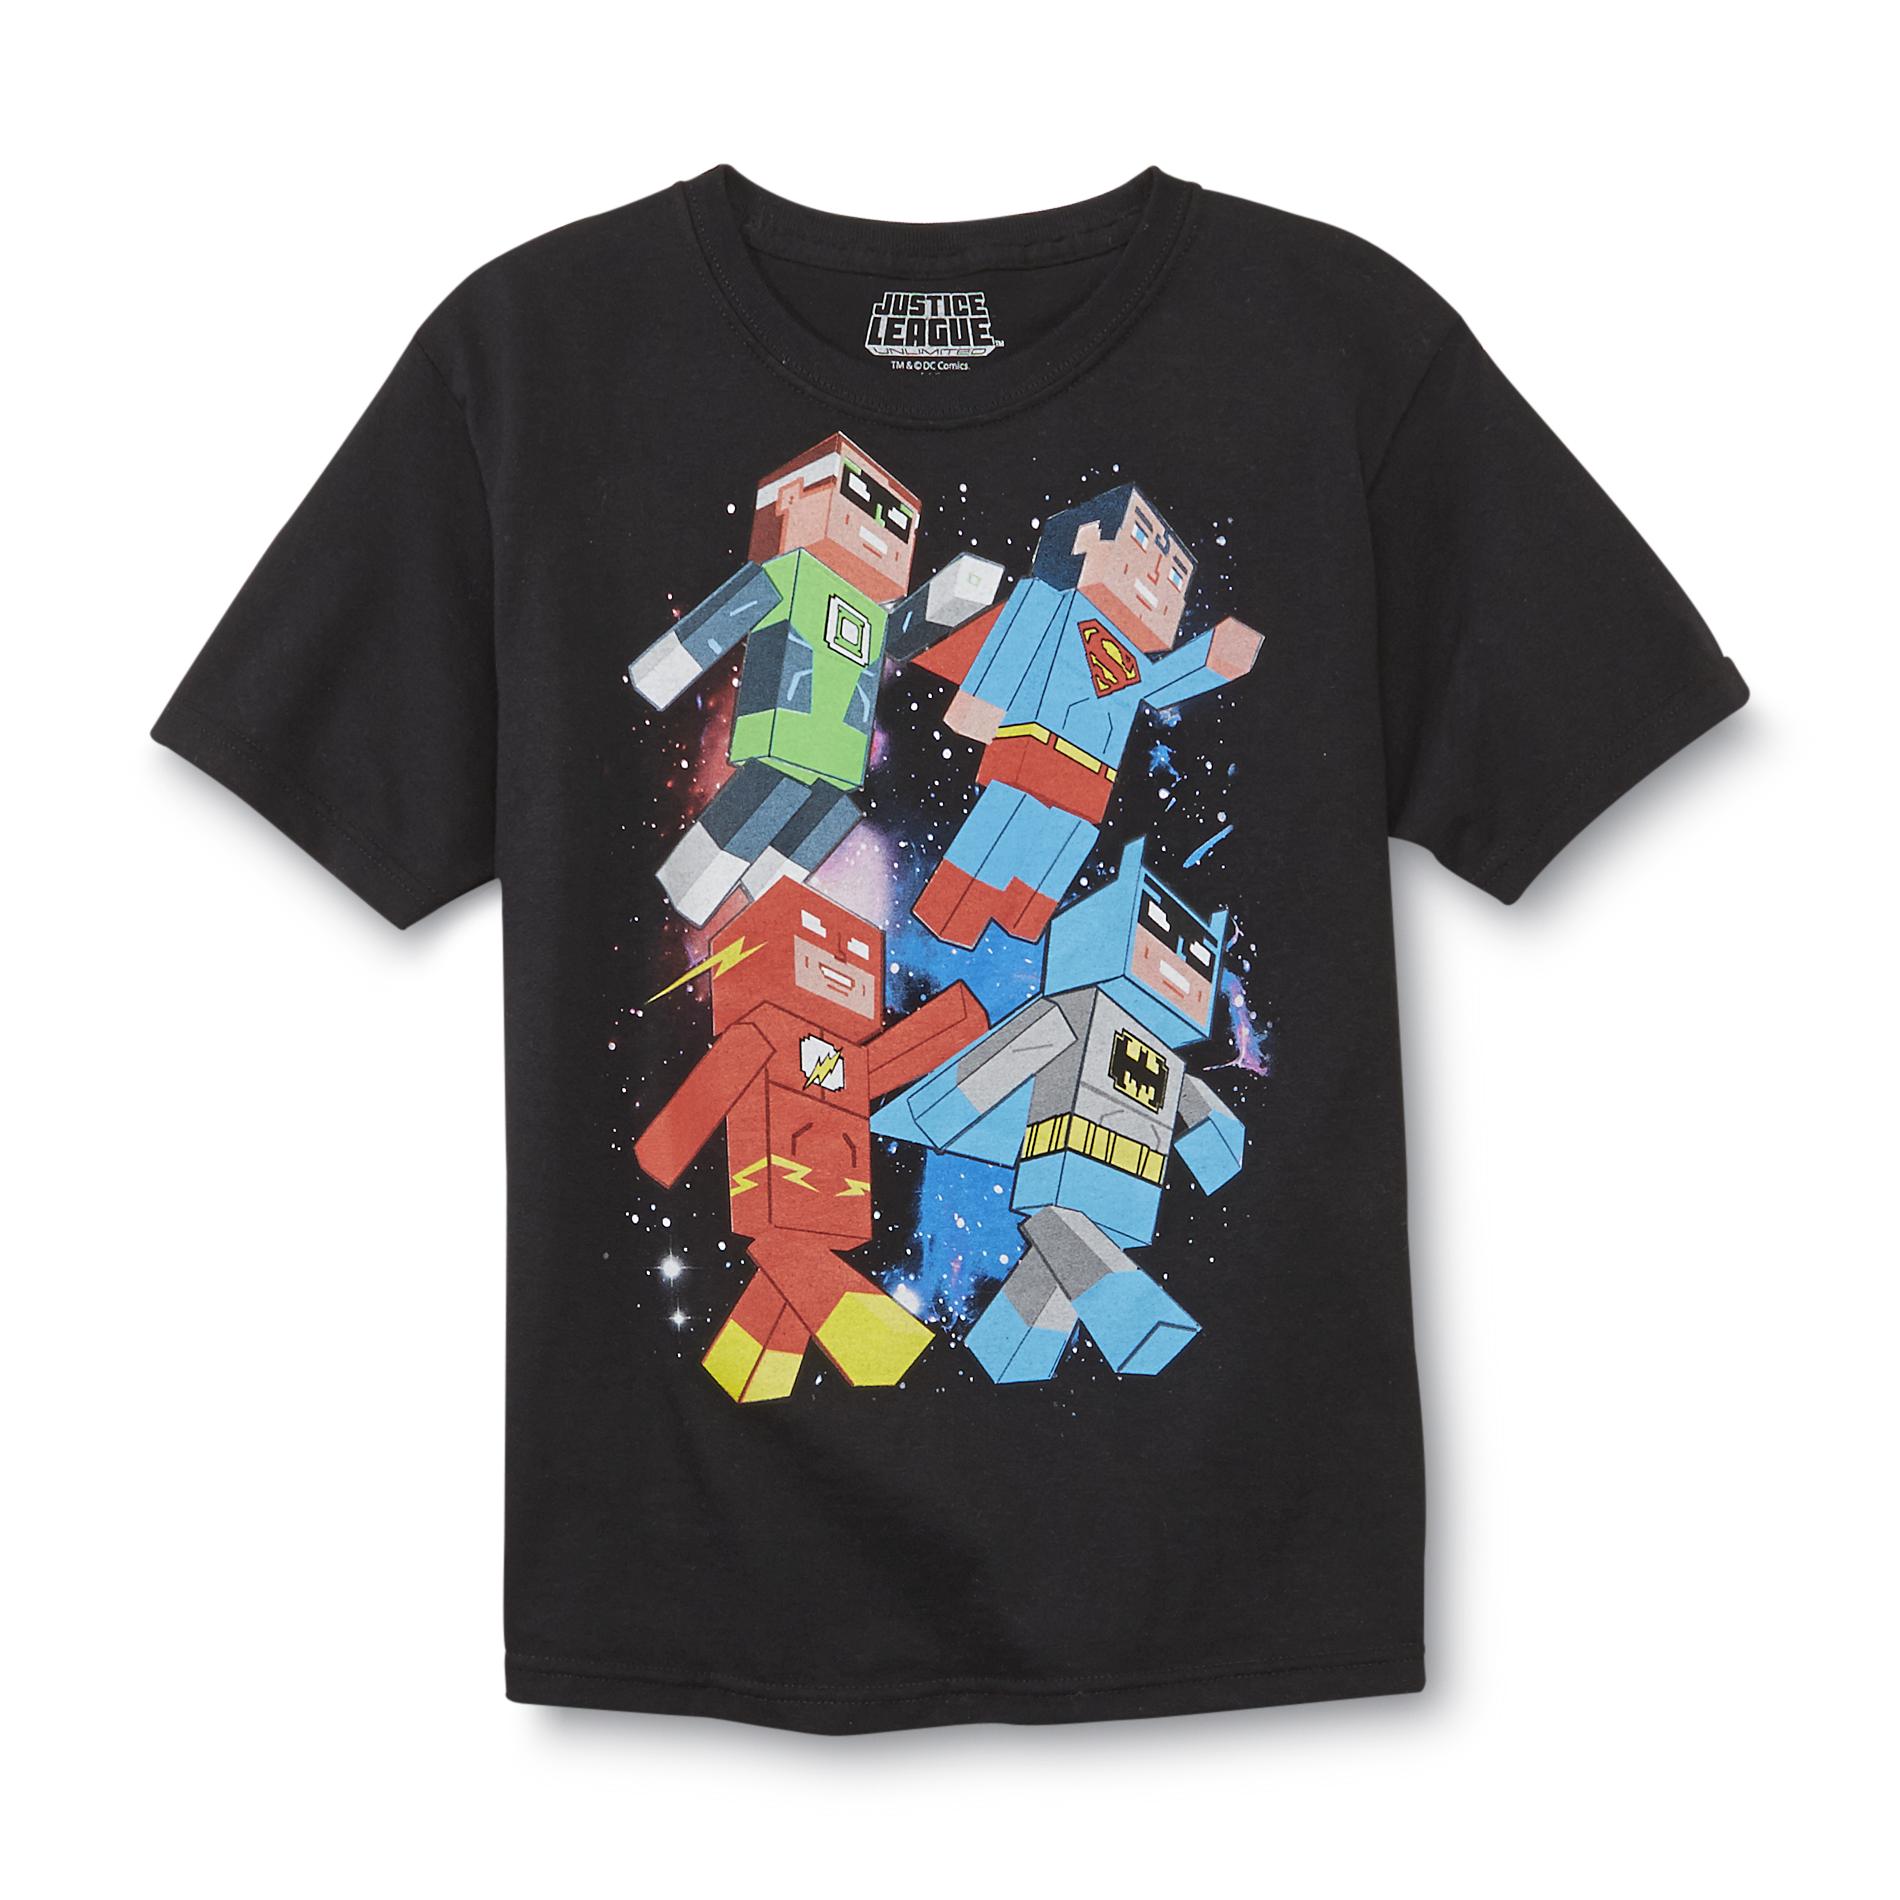 Warner Brothers Justice League Boy's Graphic T-Shirt - Superheroes